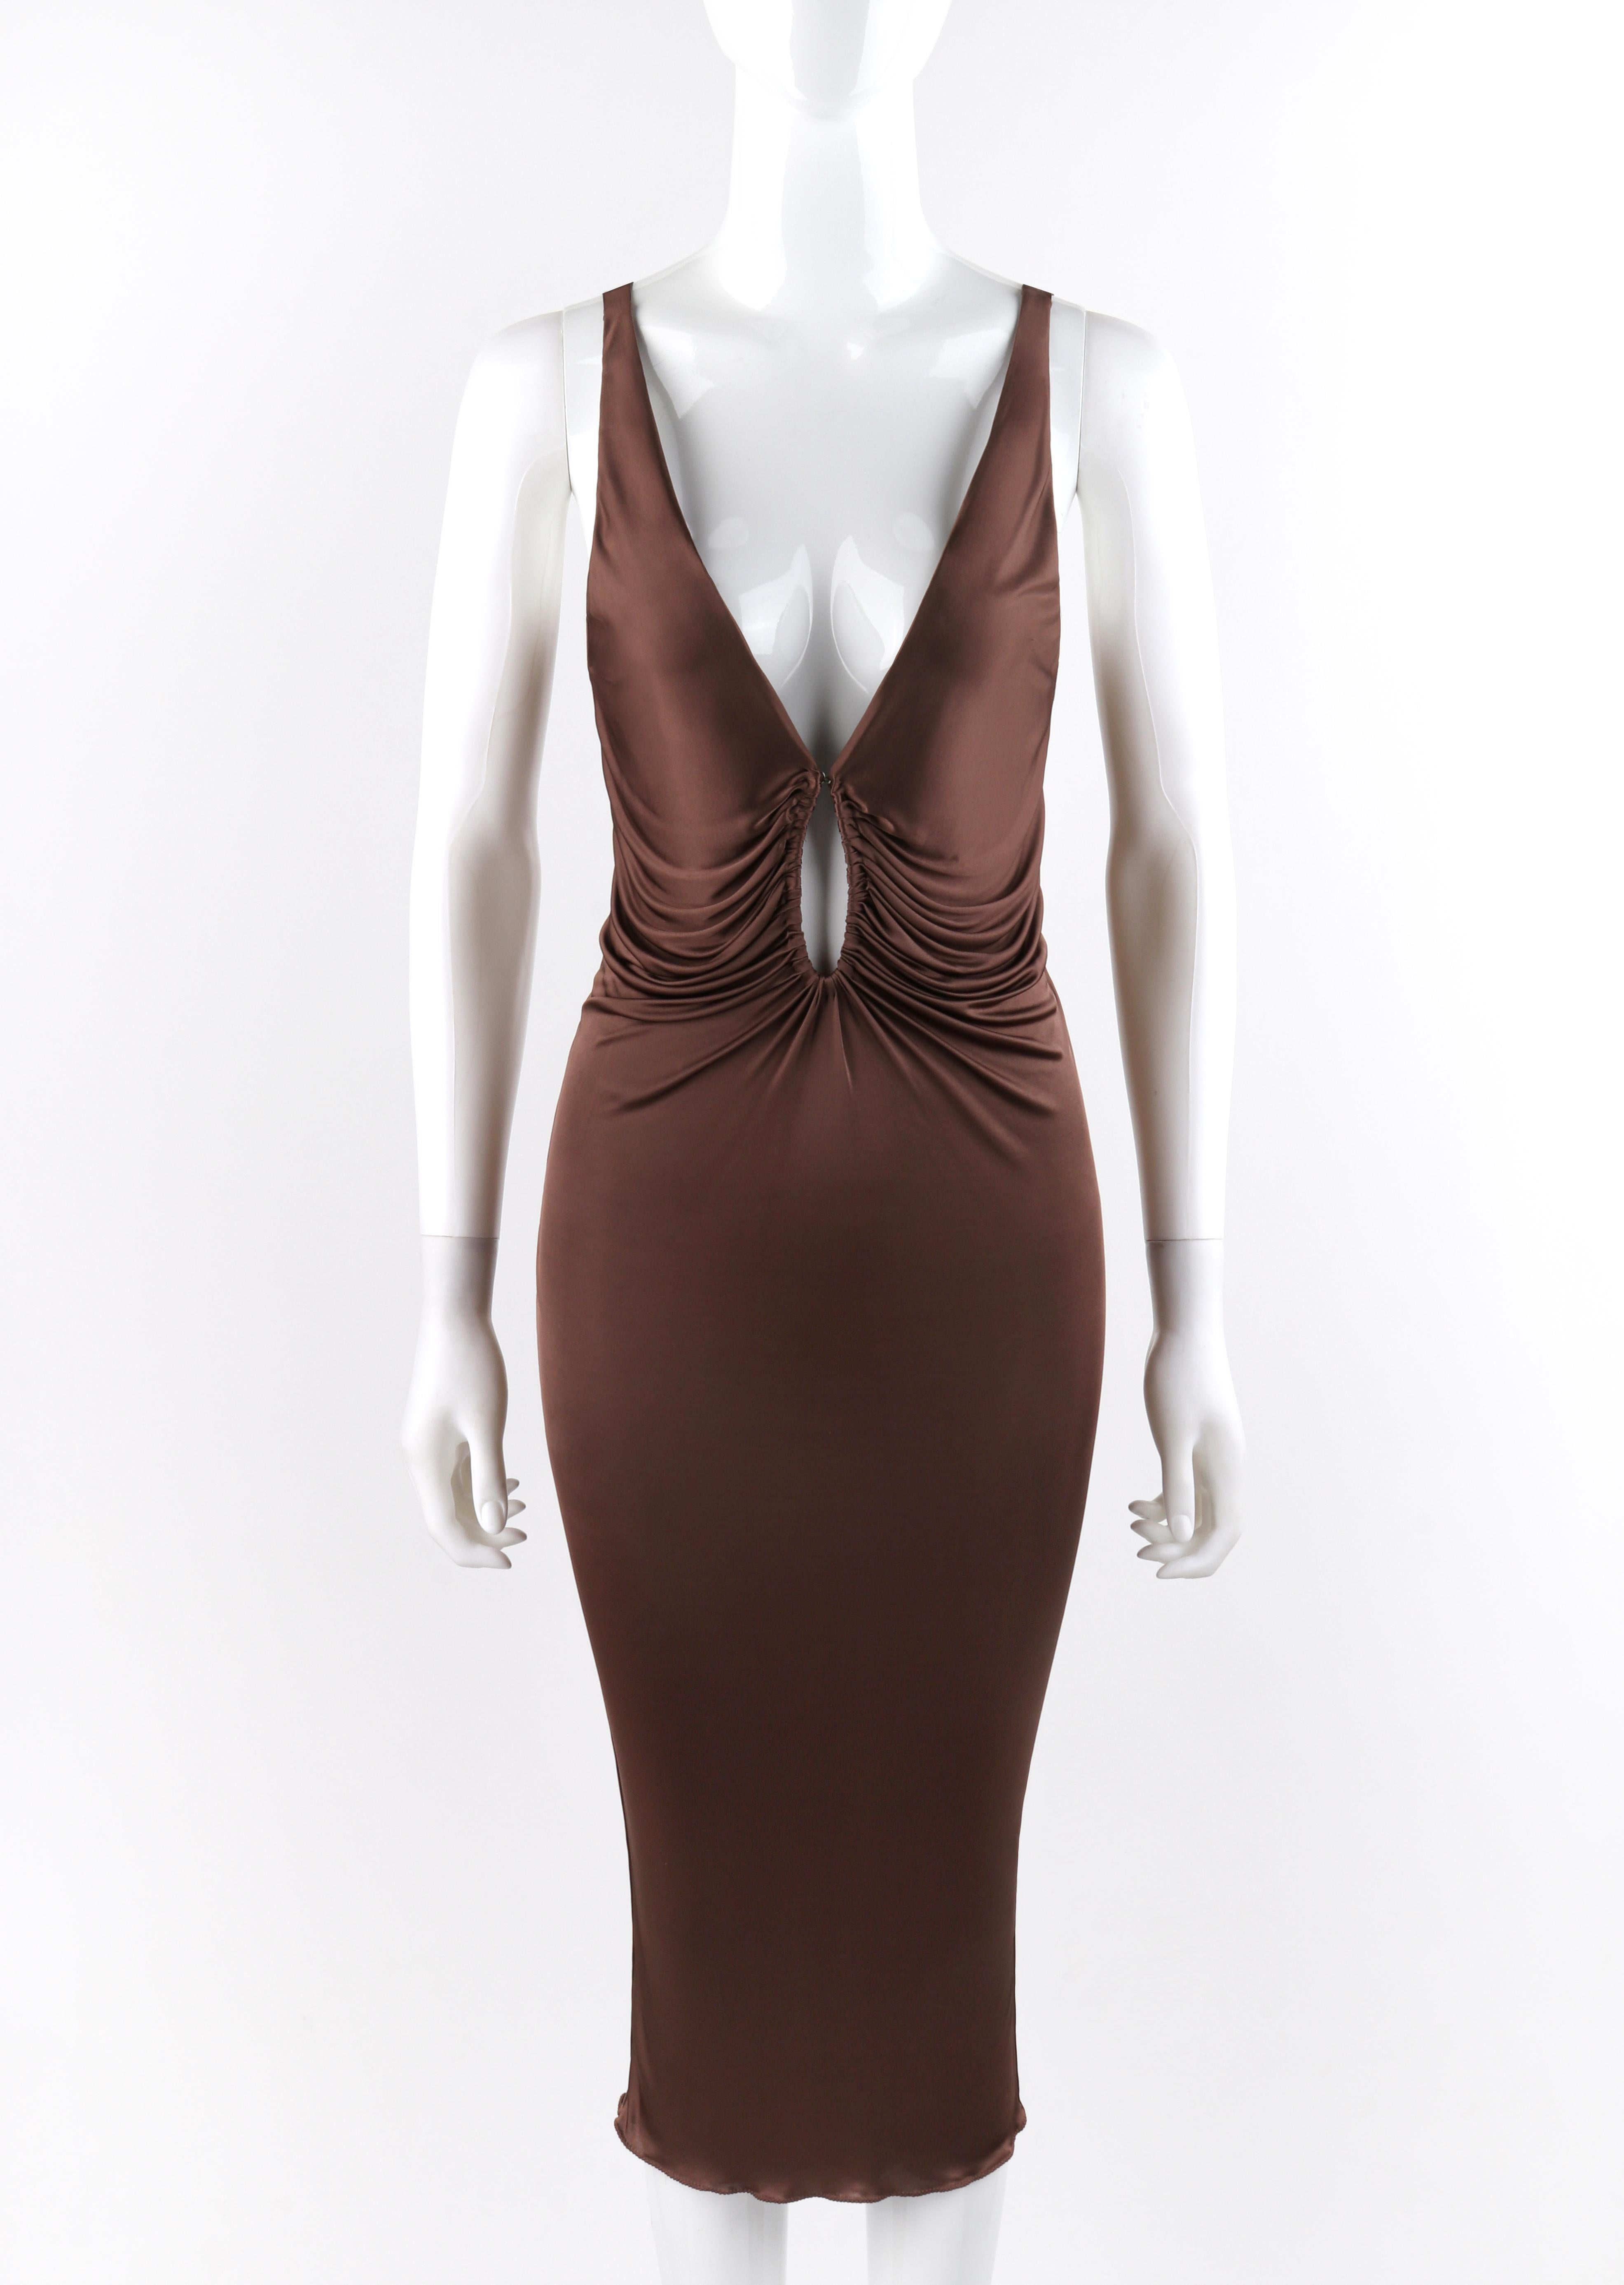 ALEXANDER McQUEEN S/S 1996 Brown Plunging Keyhole Neck Bodycon Midi Dress
  
Brand / Manufacturer: Alexander McQueen
Collection: Spring / Summer 1996 
Designer: Alexander McQueen
Style: Bodycon / shift dress
Color(s): Shades of brown
Lined: